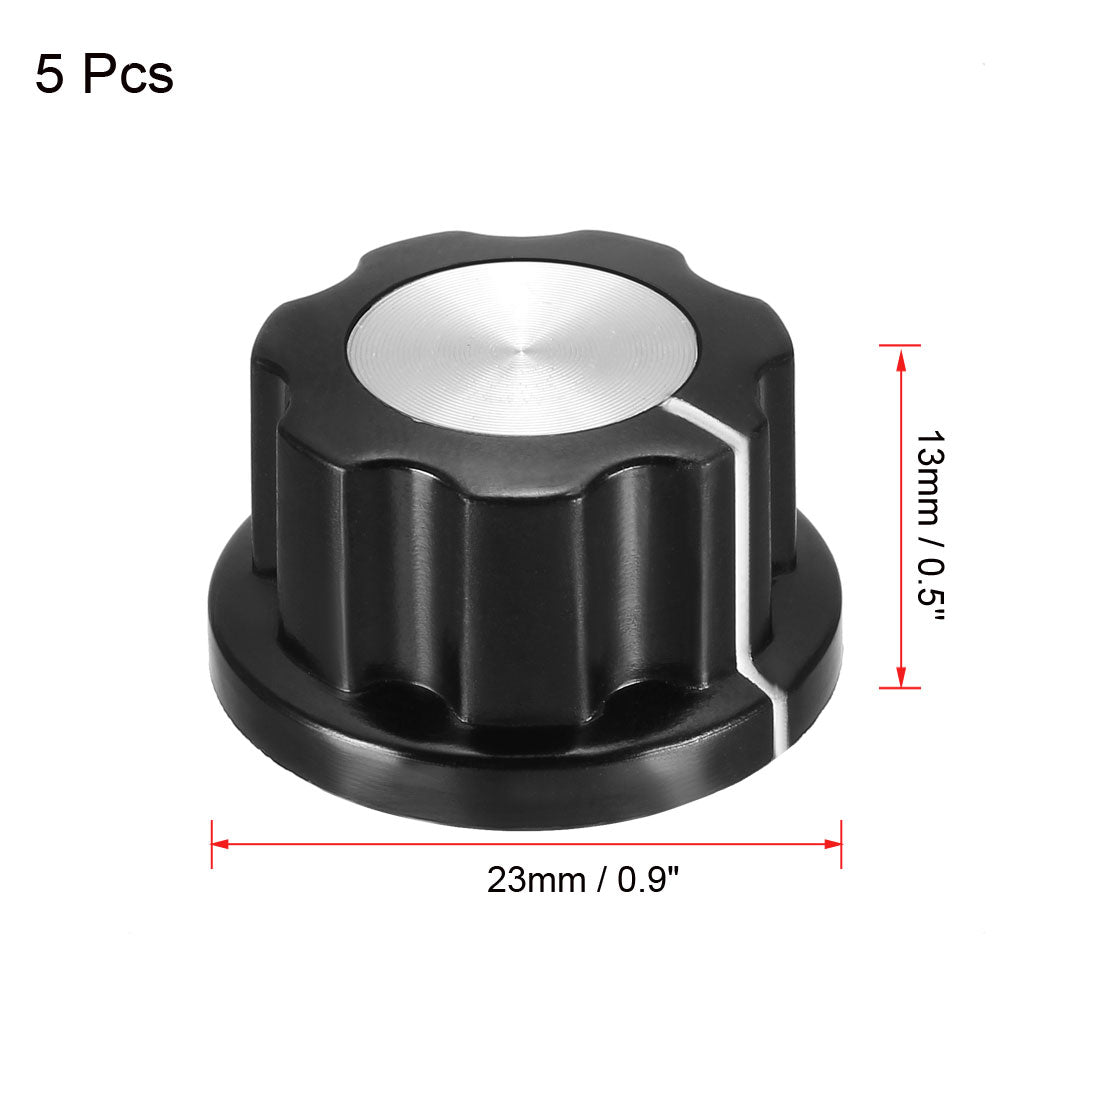 uxcell Uxcell 5Pcs Speaker Control Knob Power Amplifier Knob 23mm Dia. Rotary Knobs for 6mm Dia. Shaft Potentiometer